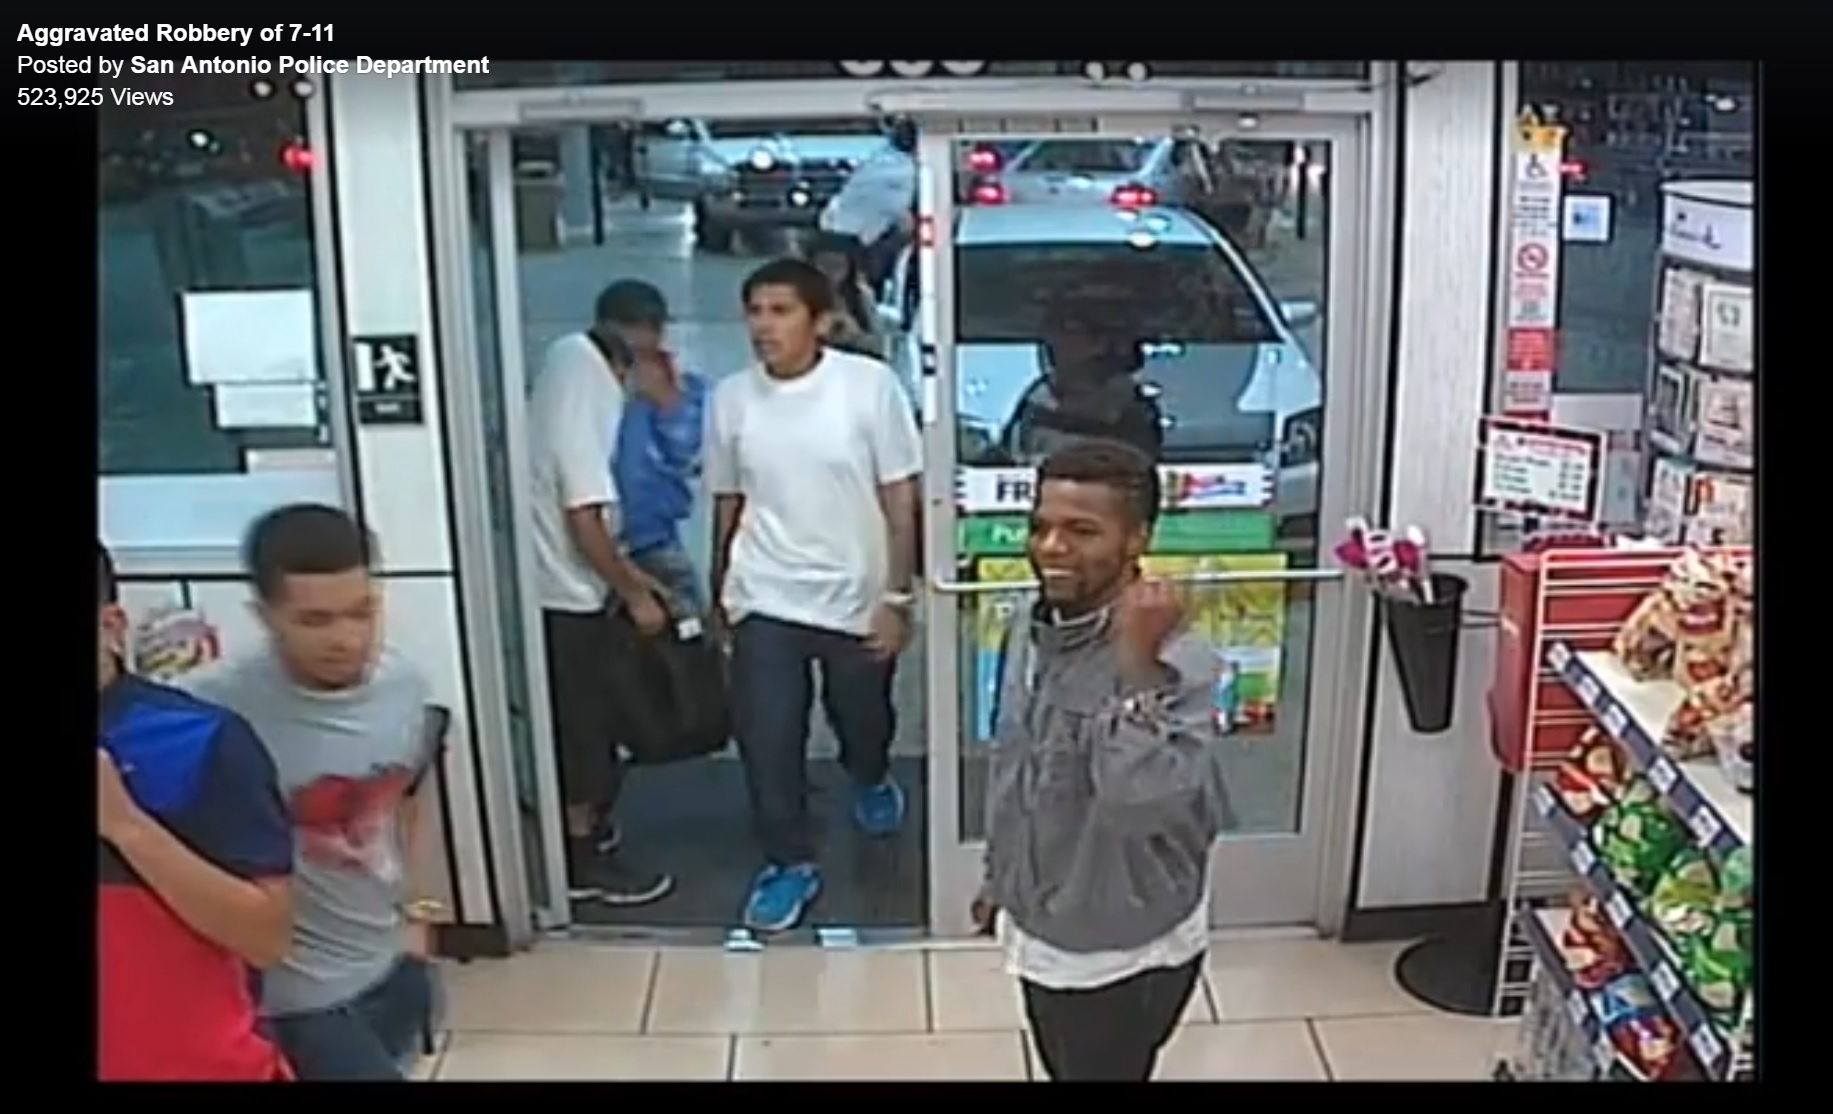 Video Shows Flash Robbery With Armed Teens In Sa Police Search For Suspects